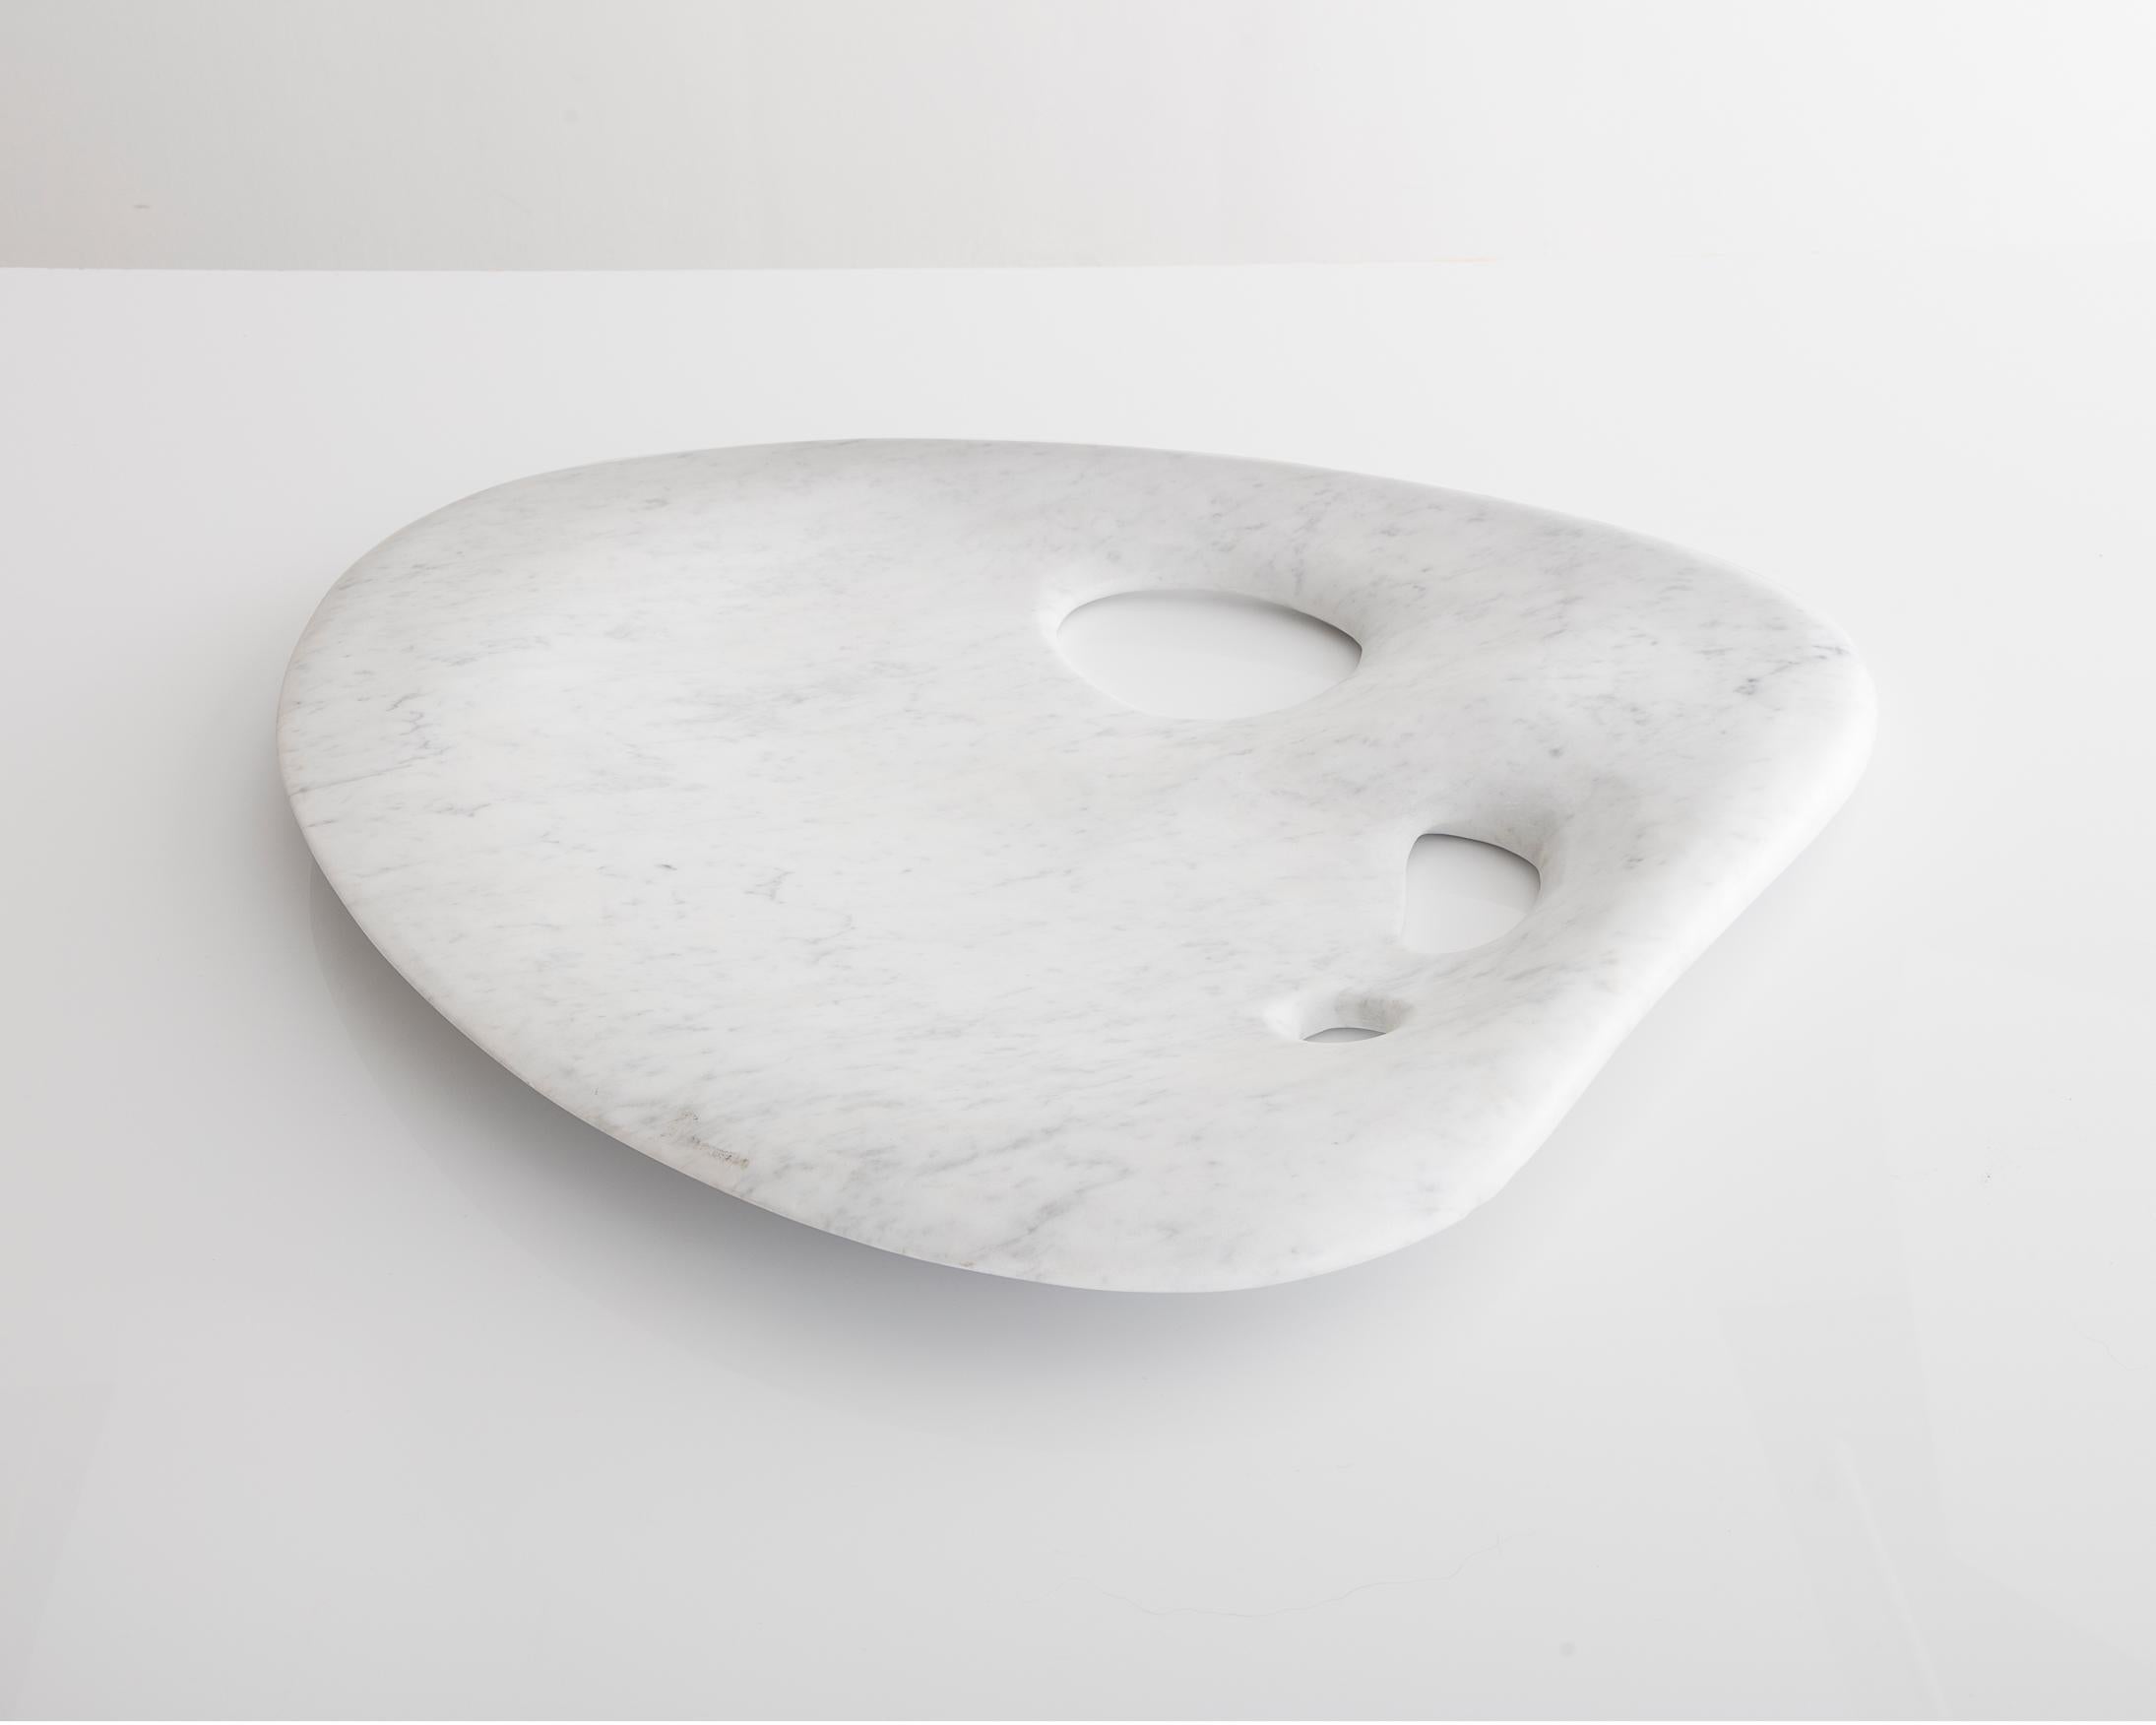 Sculptural Symphysodon disc in Carrera marble. Designed and made by Rogan Gregory, USA, 2017.
 